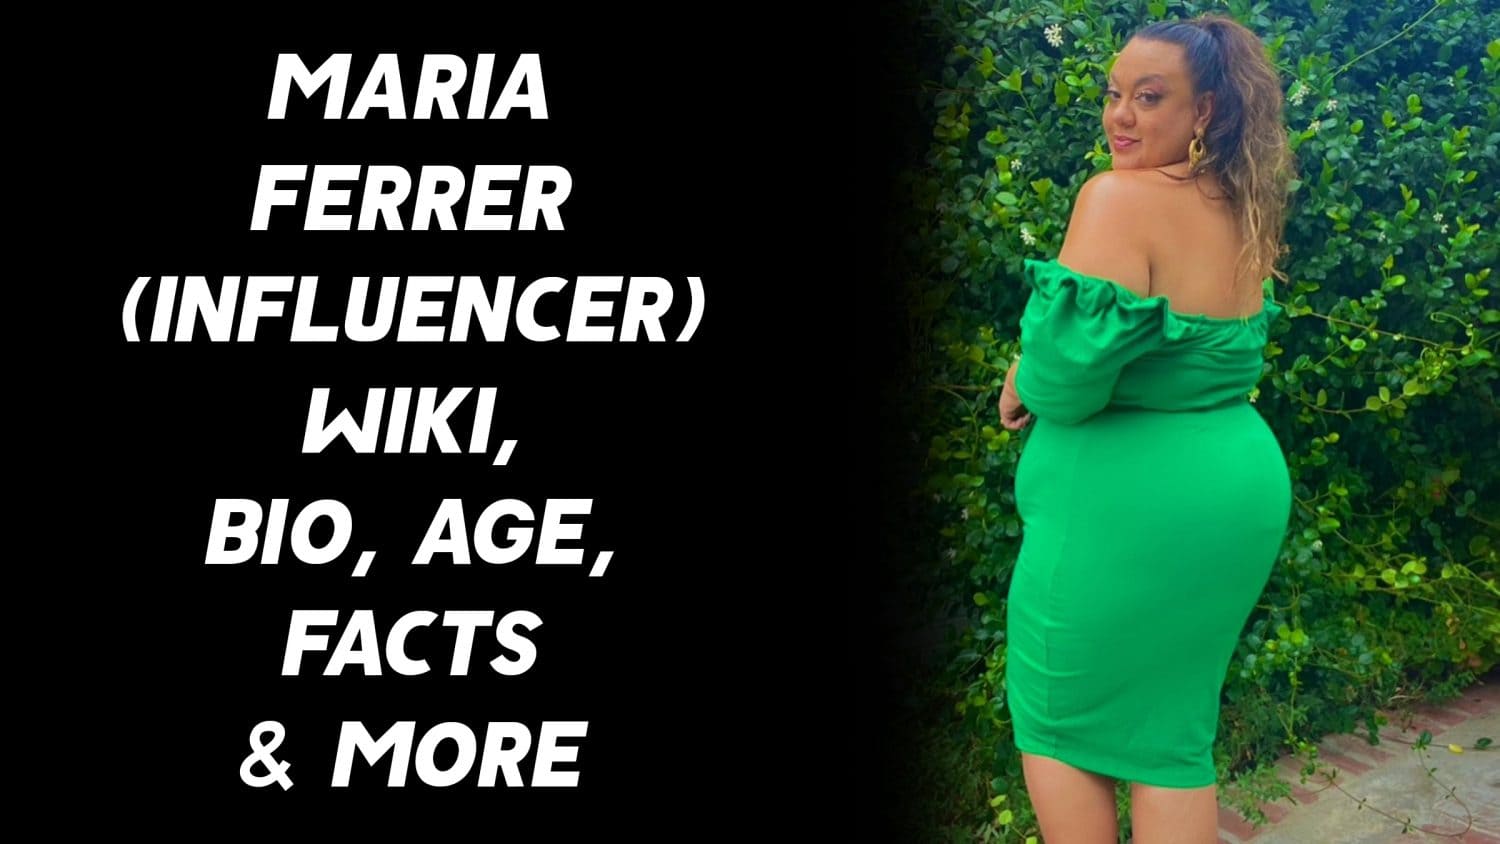 Maria Ferrer (Influencer) Wiki, Biography, Age, Facts & More 1